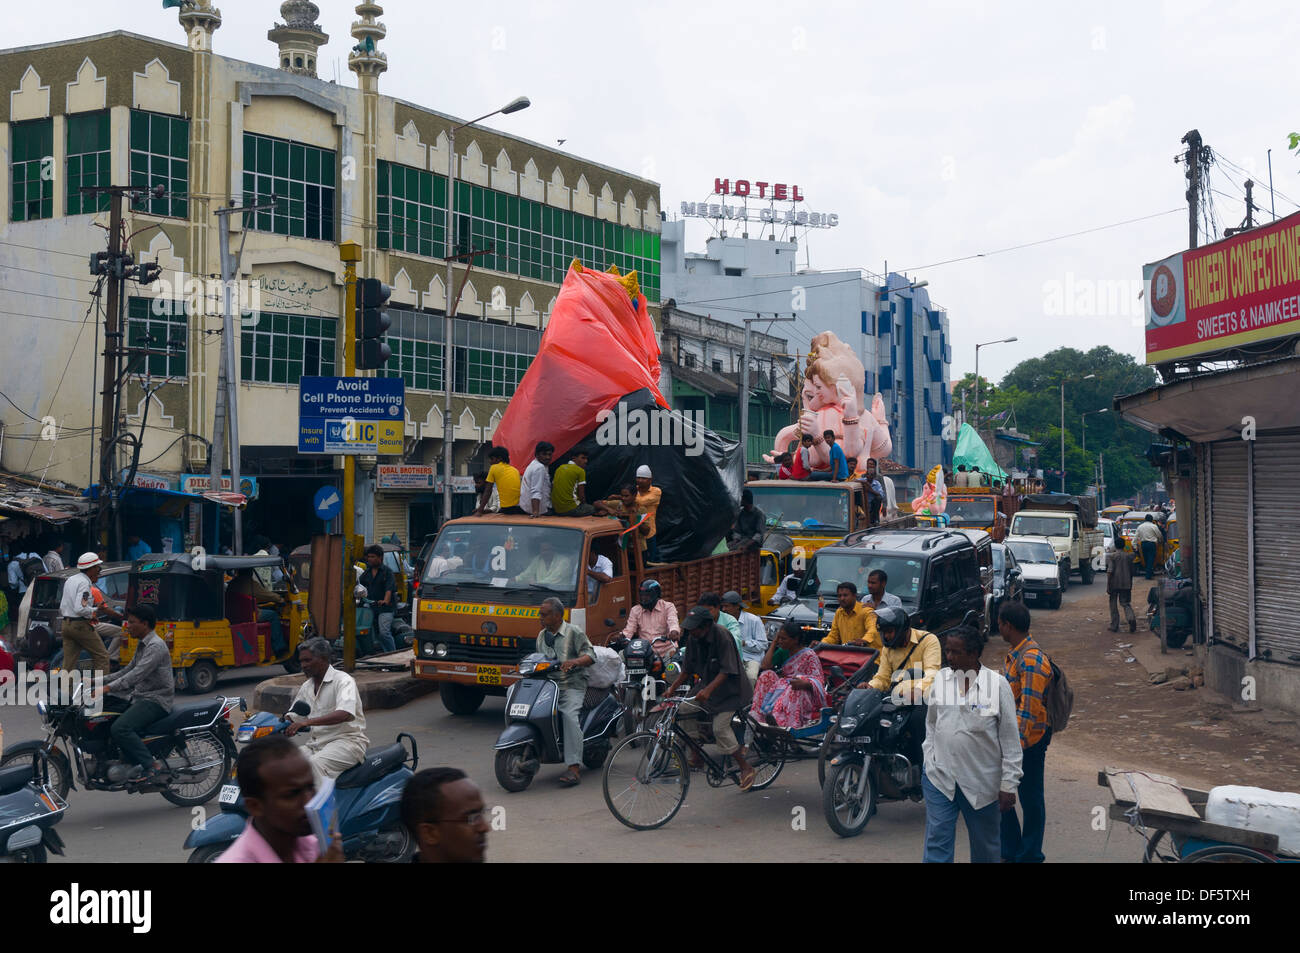 Ganesh Idols being transported to temporary shrines where they will be adorned with flowers and displayed for Ganesh Chaturthi. Stock Photo